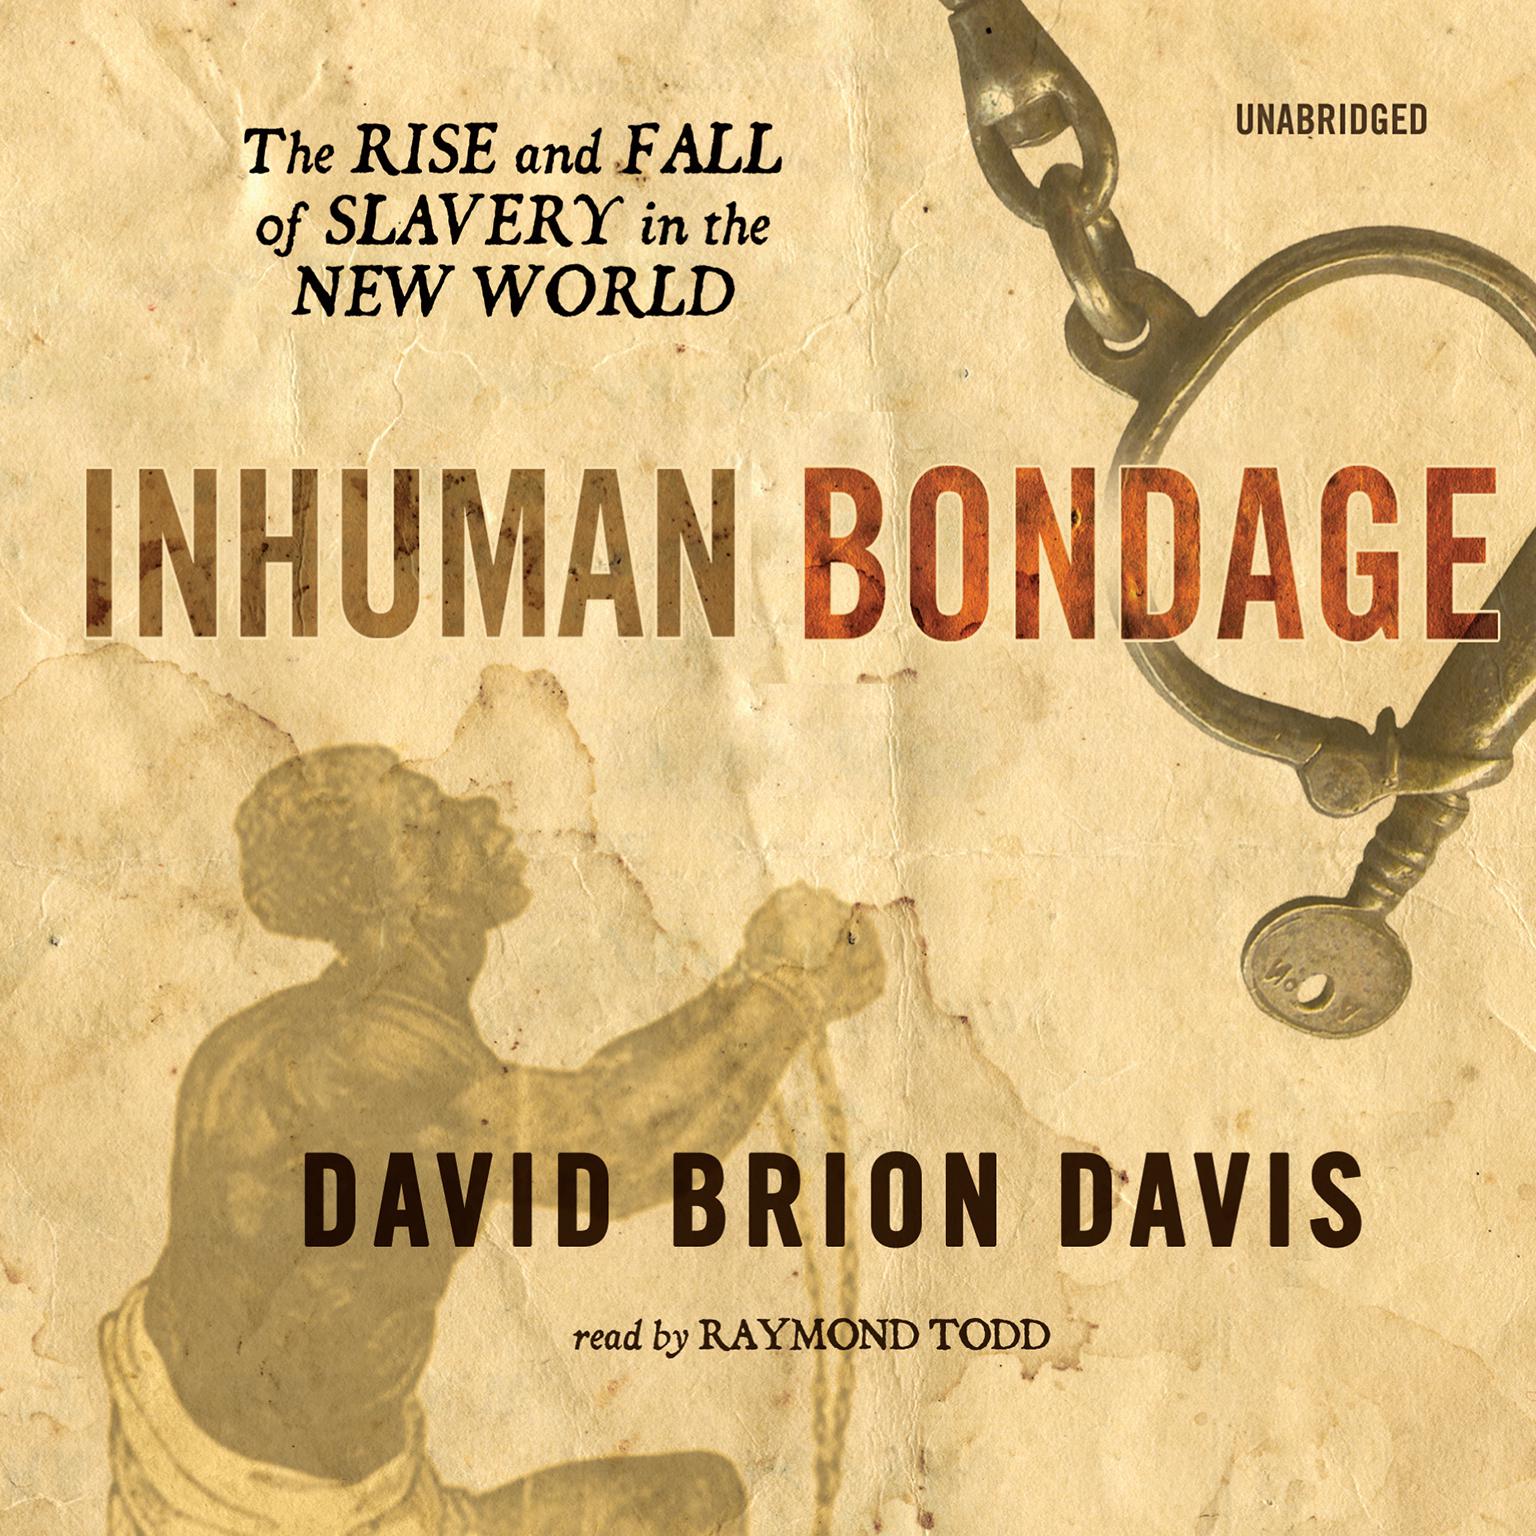 Inhuman Bondage: The Rise and Fall of Slavery in the New World Audiobook, by David Brion Davis